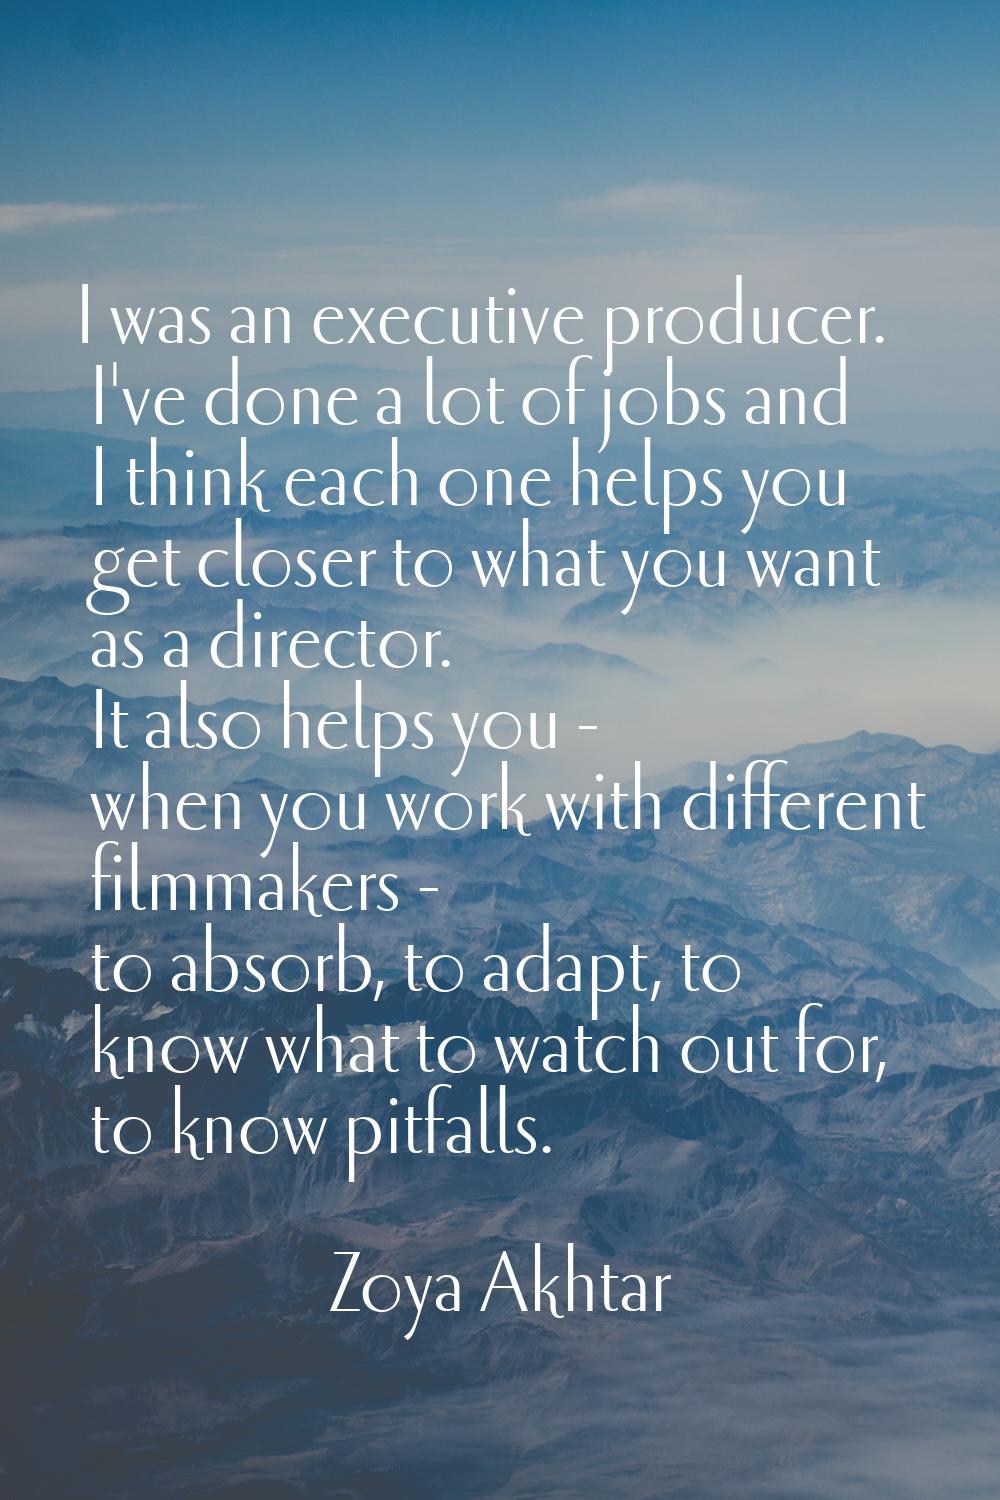 I was an executive producer. I've done a lot of jobs and I think each one helps you get closer to w